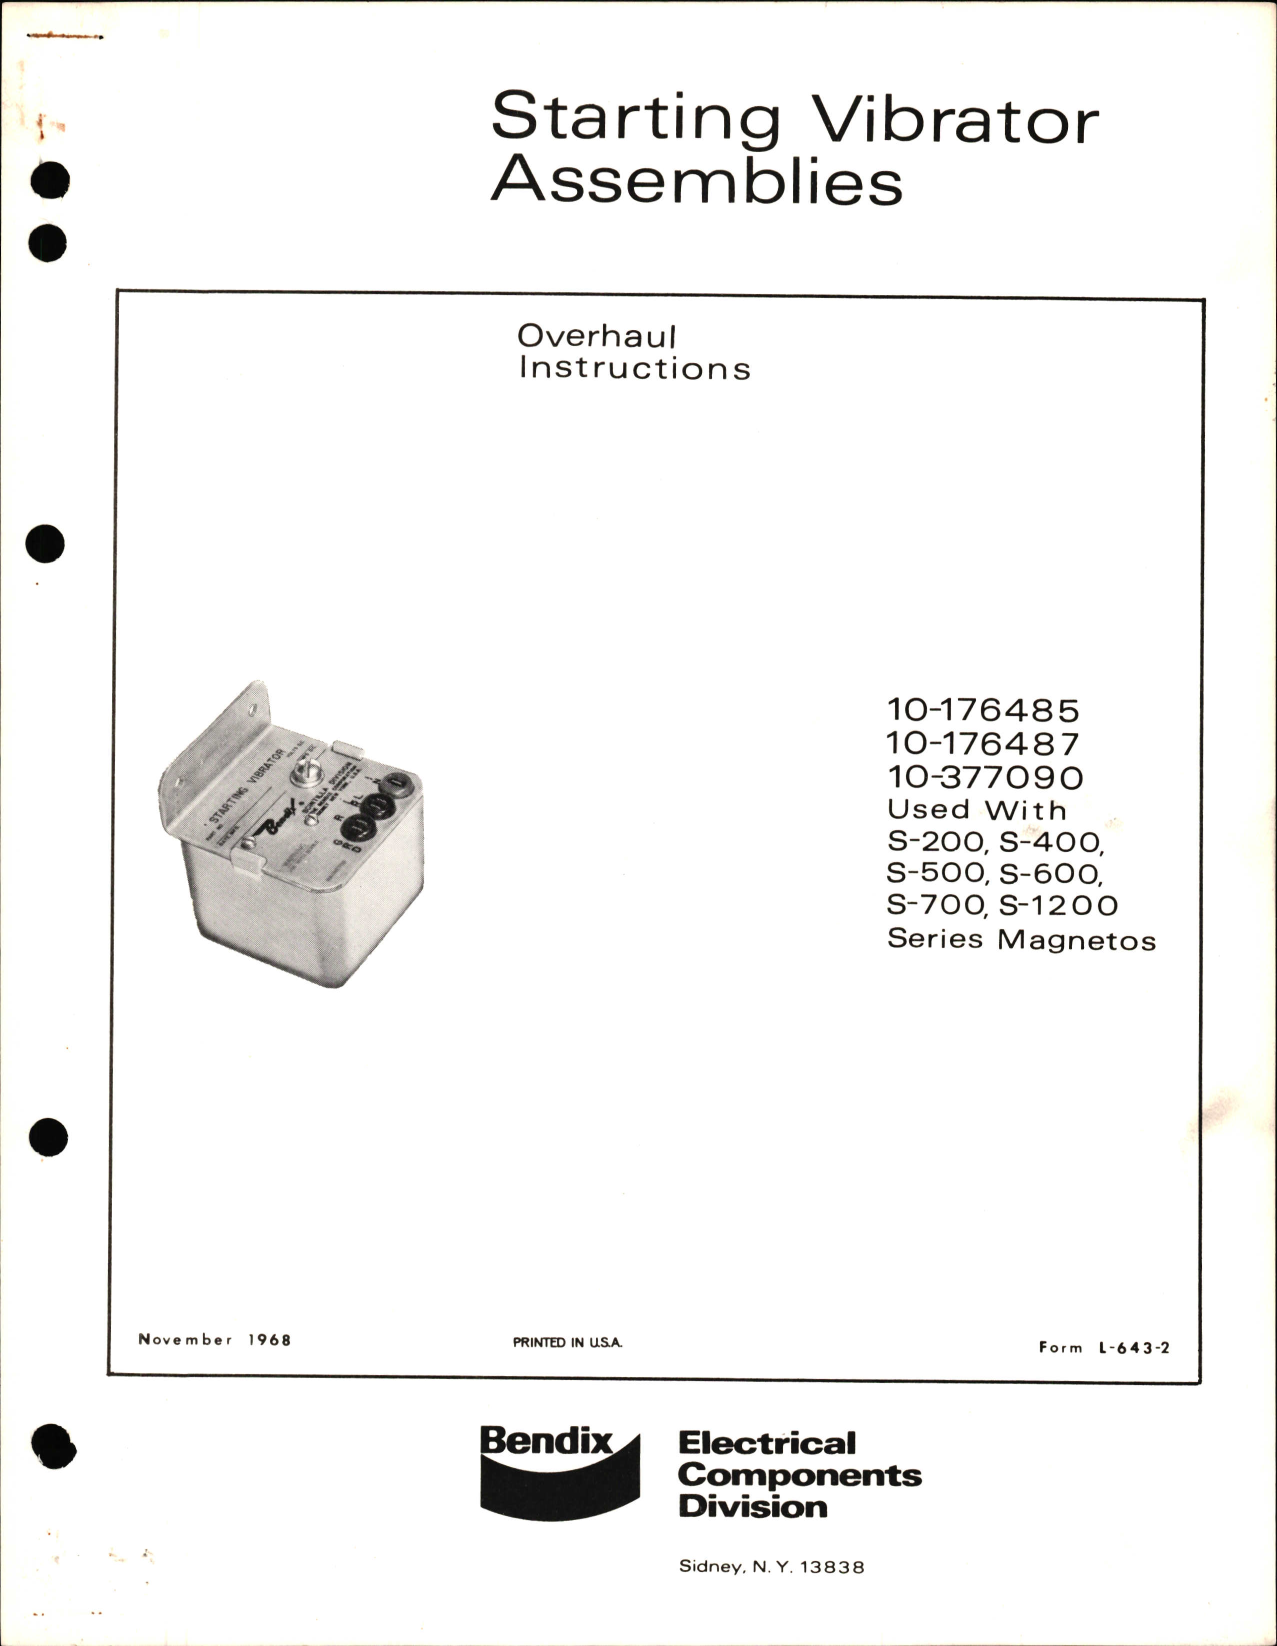 Sample page 1 from AirCorps Library document: Overhaul Instructions for Starting Vibrator Assemblies